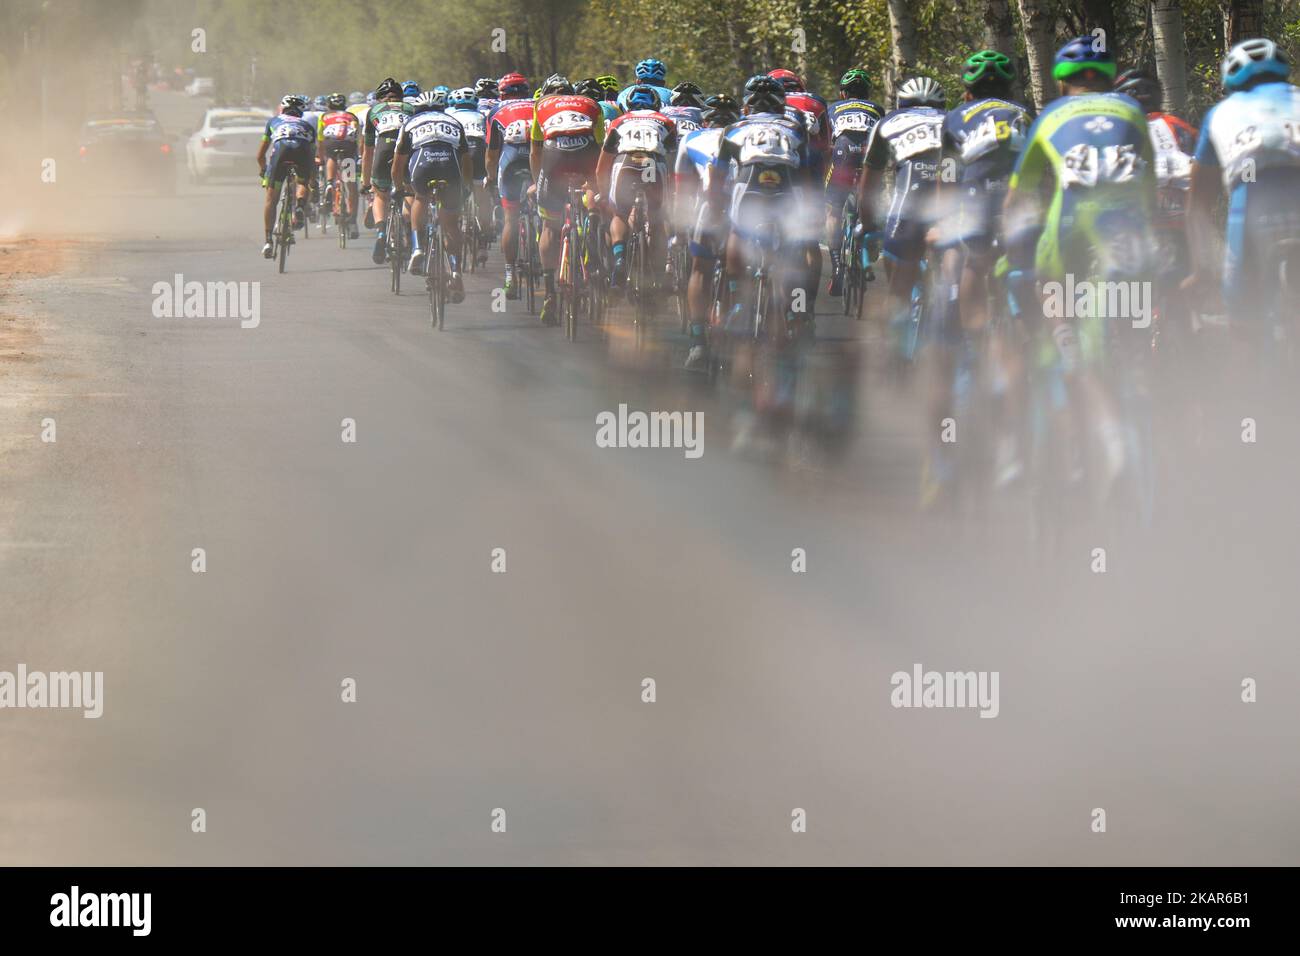 The peloton of riders during the second stage Jinzhong A to B race of the 2017 Tour of China 1, the 197km from Dazhai to Yunzhu. On Tuesday, 12 September 2017, in Yunzhu, Xiyang County, Shanxi Province, China. Photo by Artur Widak  Stock Photo